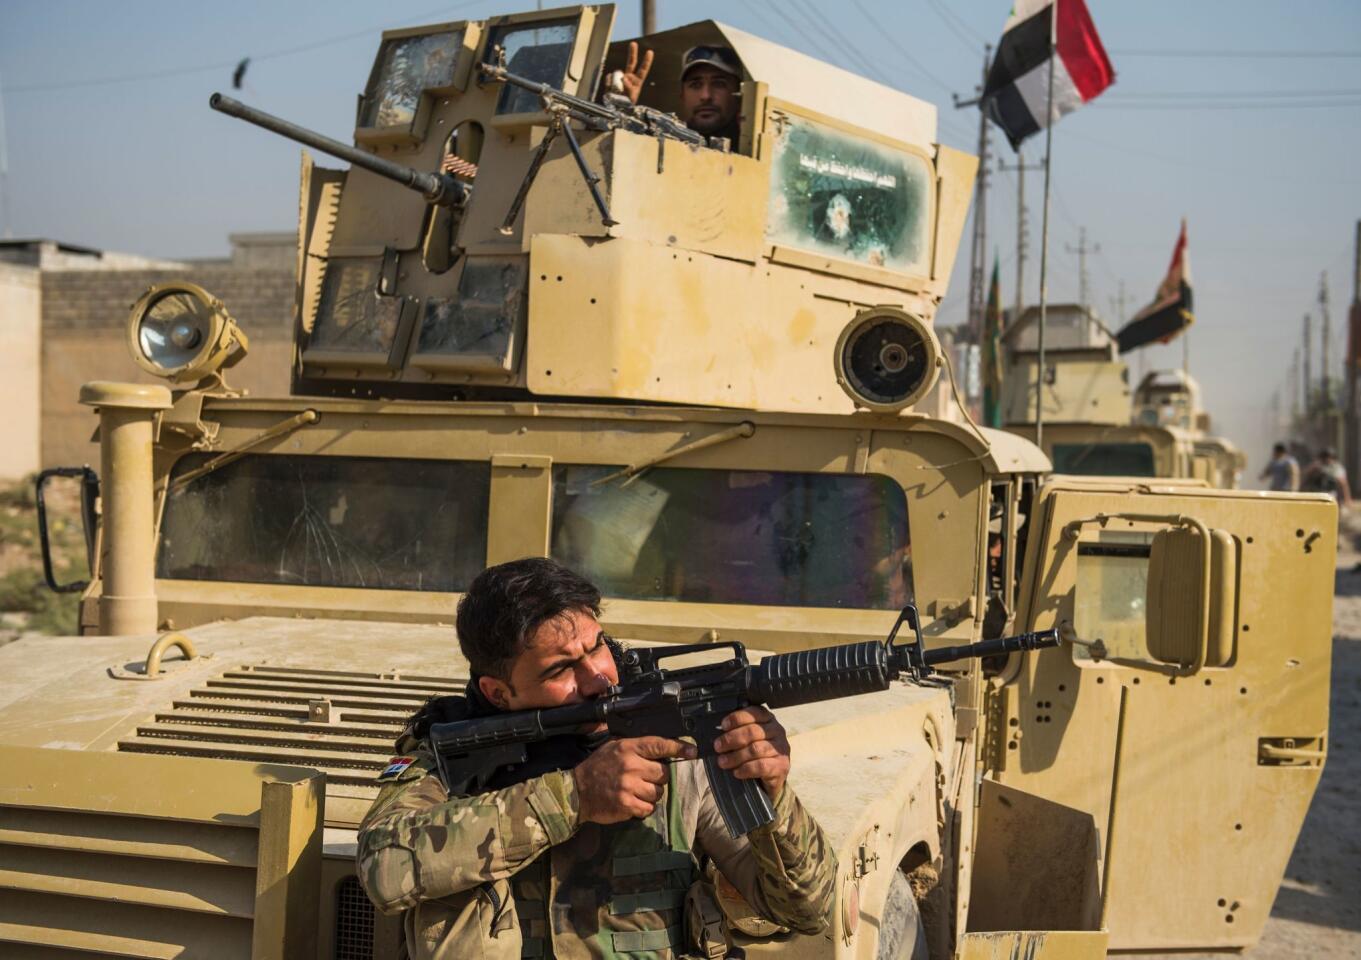 The battle for Mosul